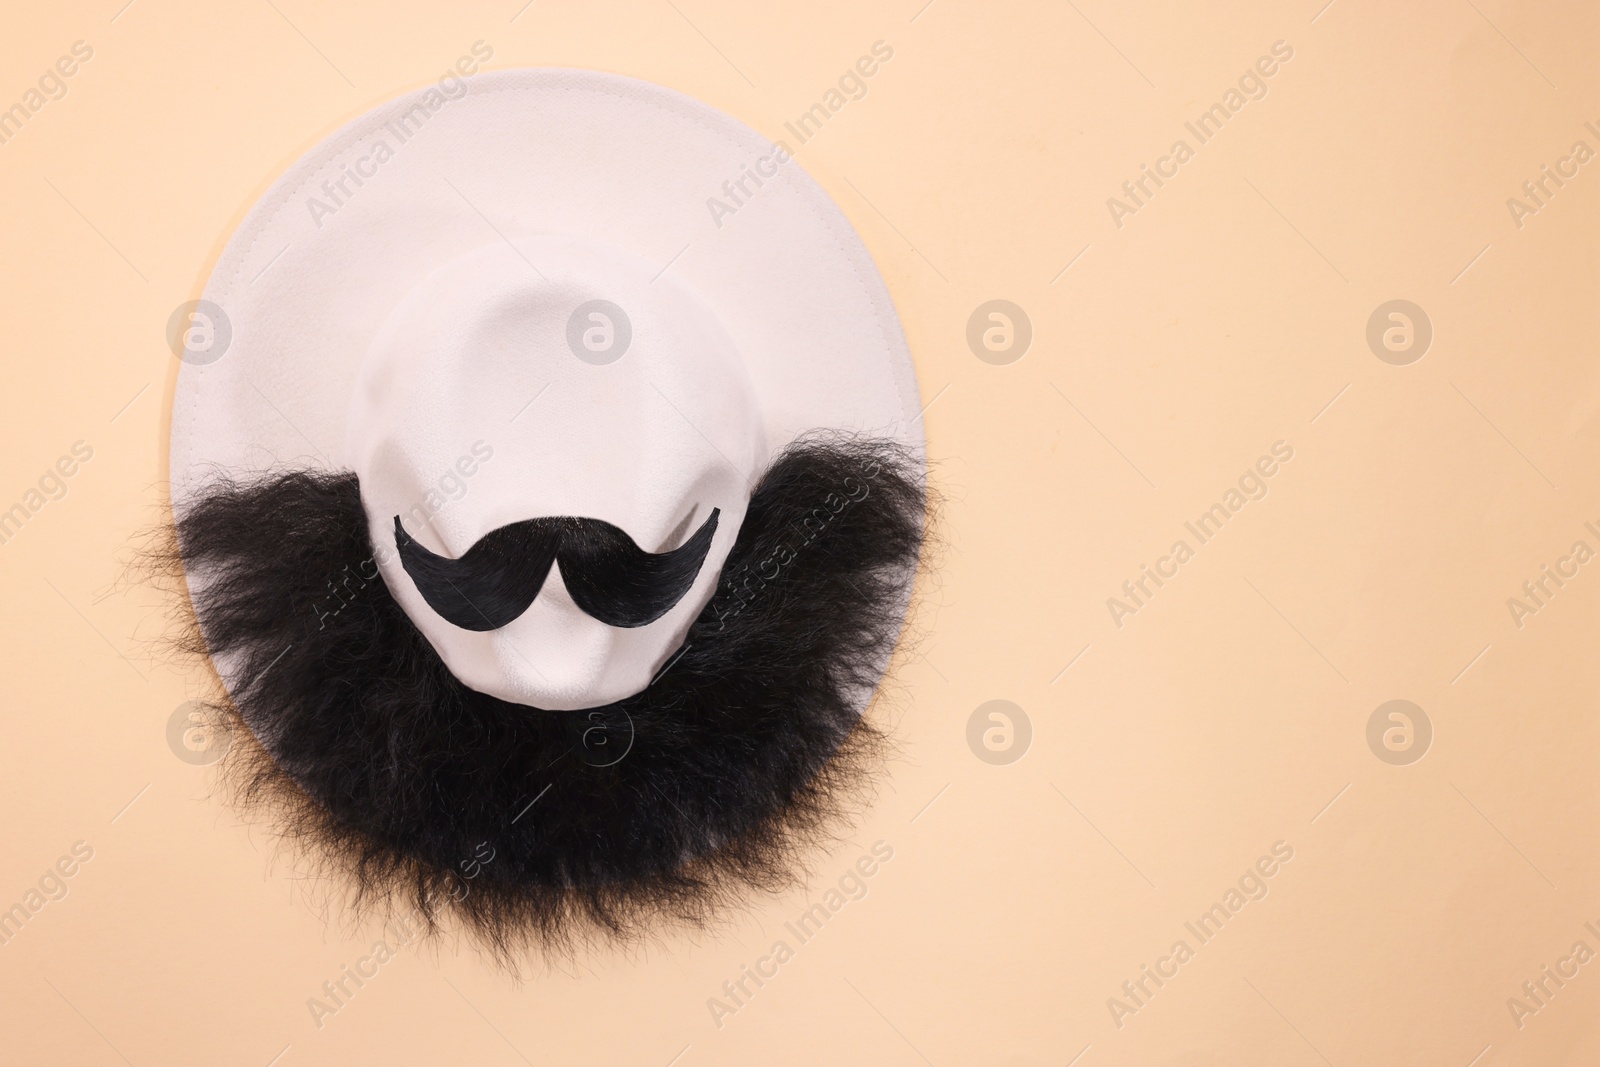 Photo of Man's face made of artificial mustache, beard and hat on beige background, top view. Space for text